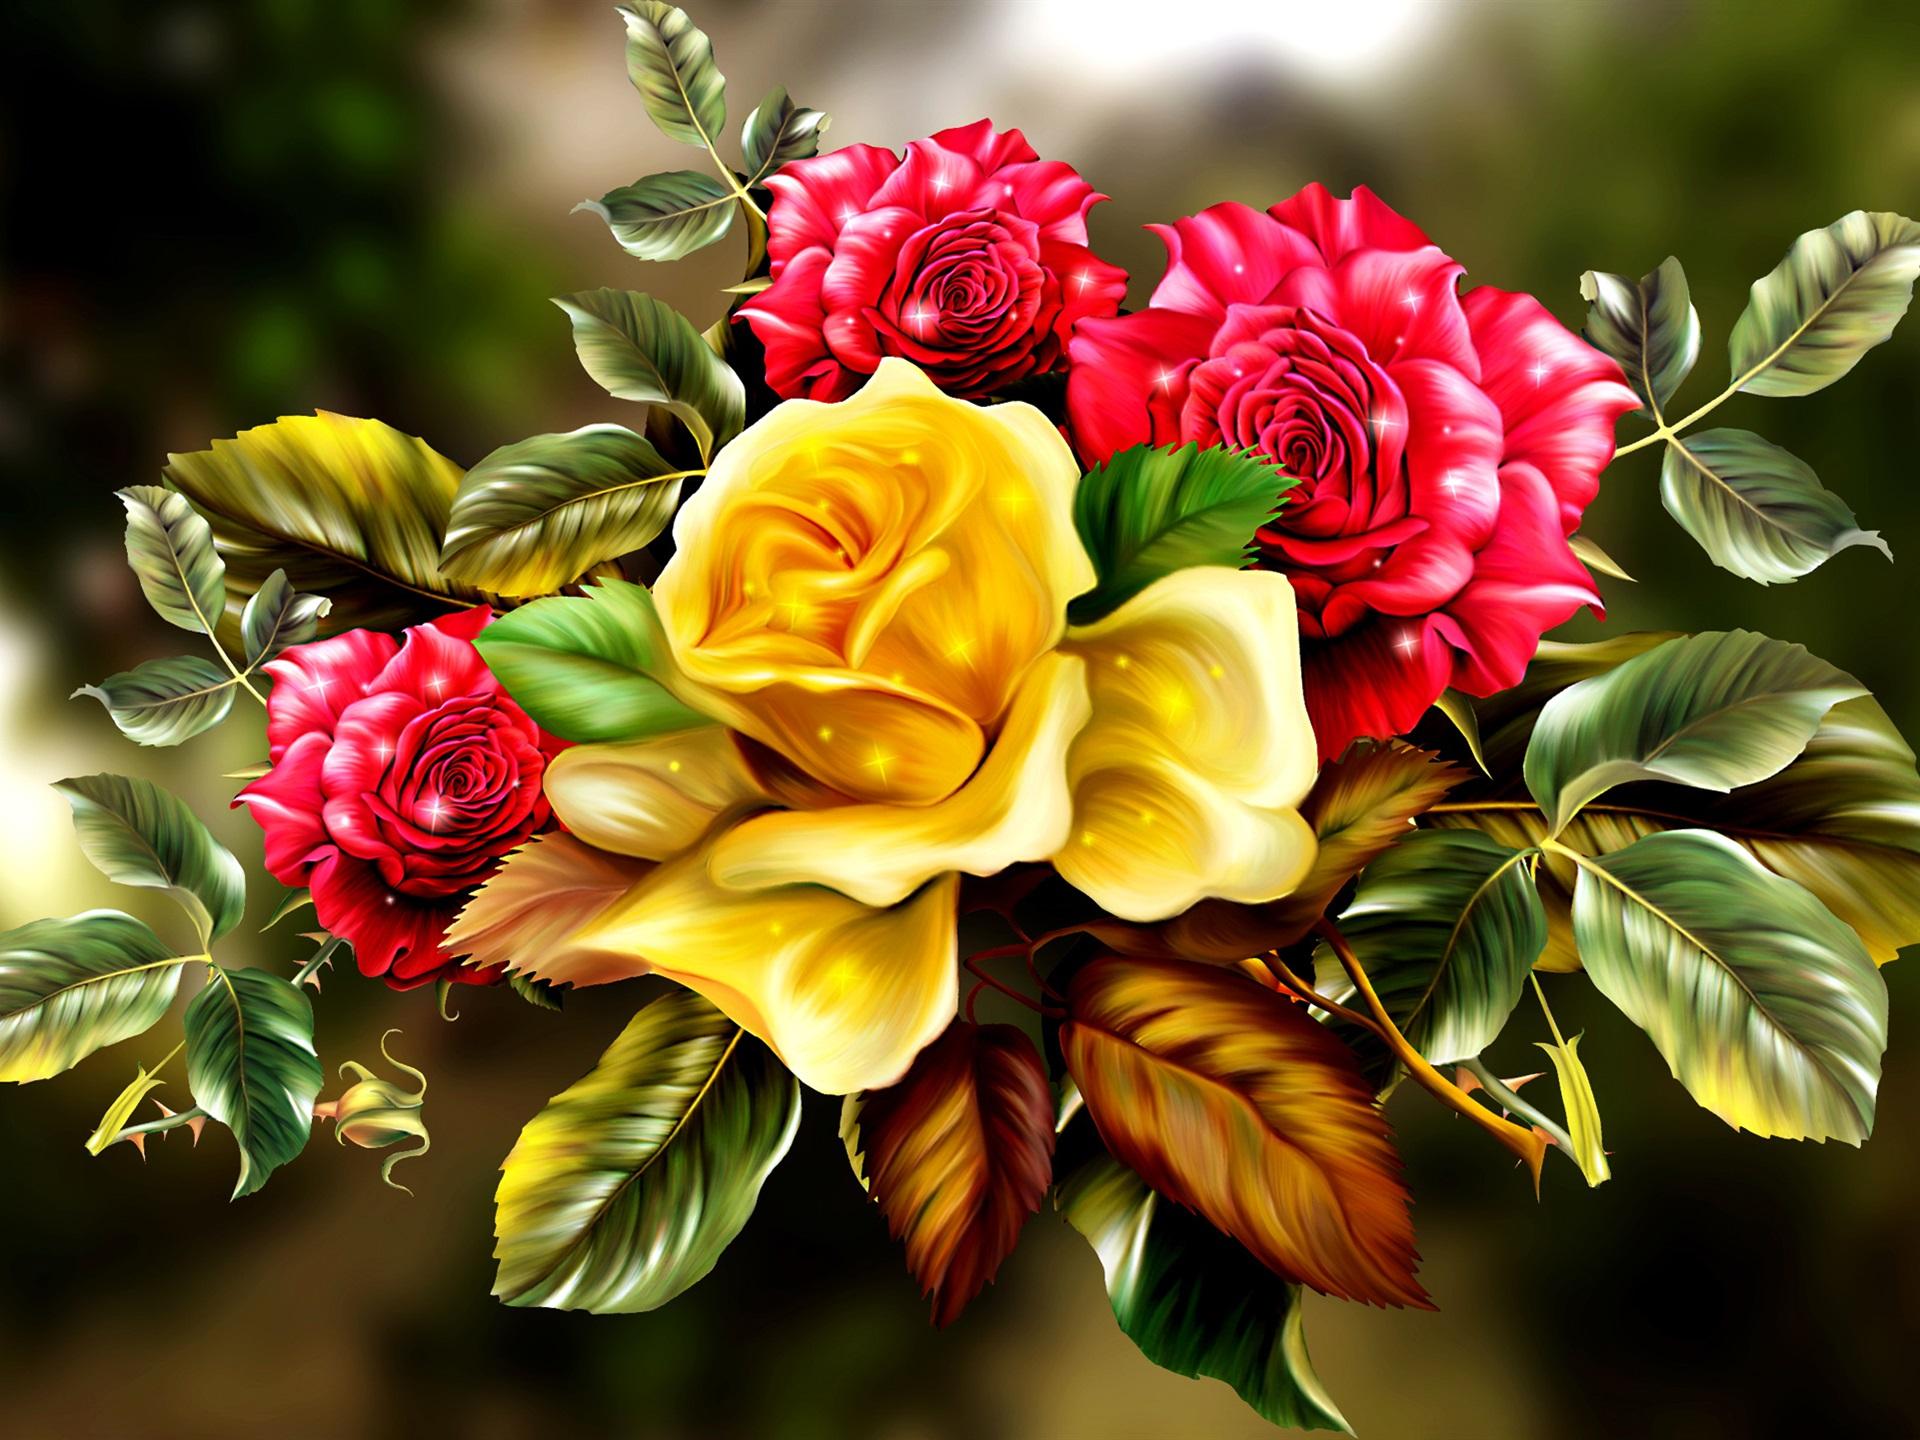 Wallpaper Golden and red rose flowers, art picture 1920x1440 HD